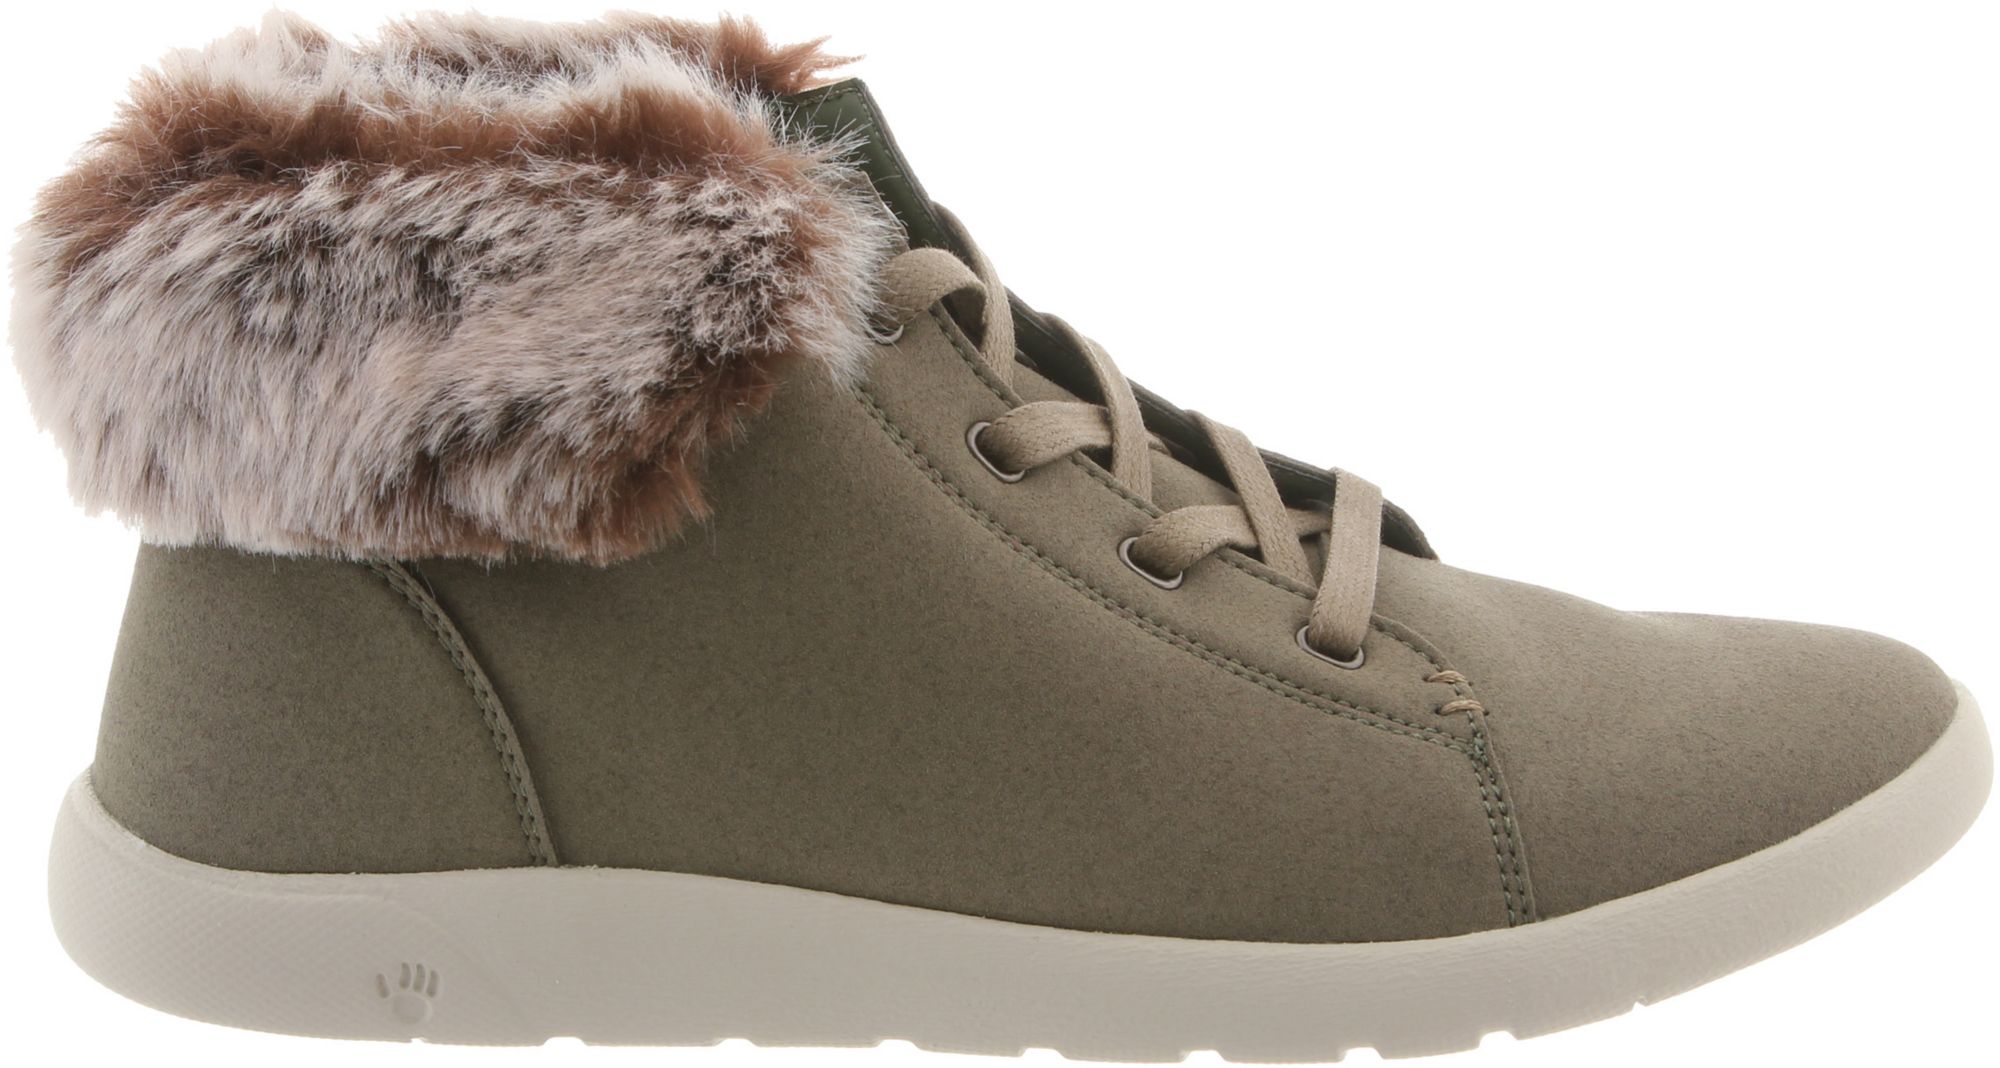 dolce vita women's pearse ankle boot